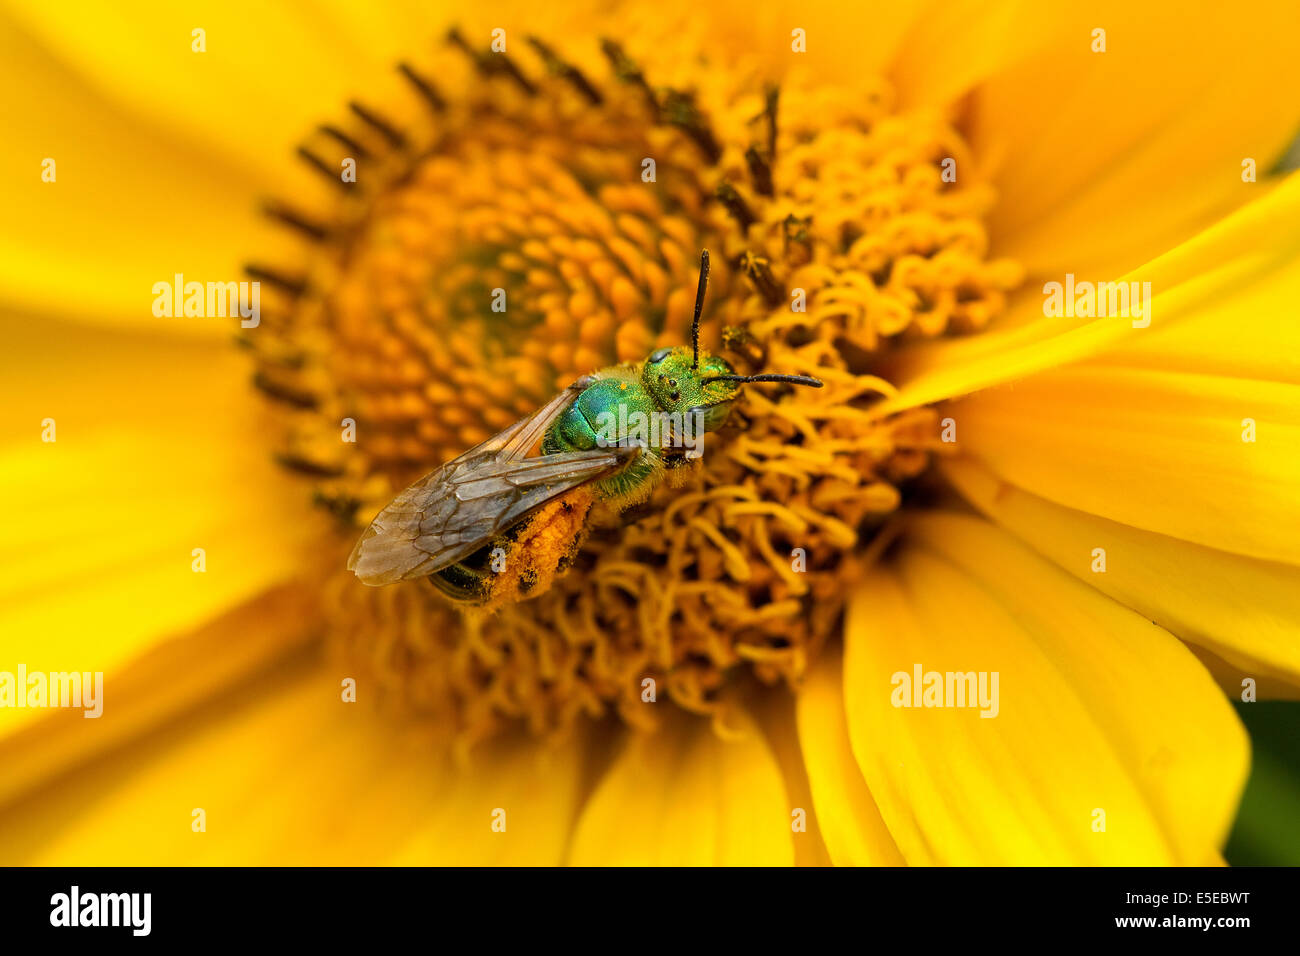 Wasp works as an insect pollinator during the pollination of a yellow flower. Stock Photo